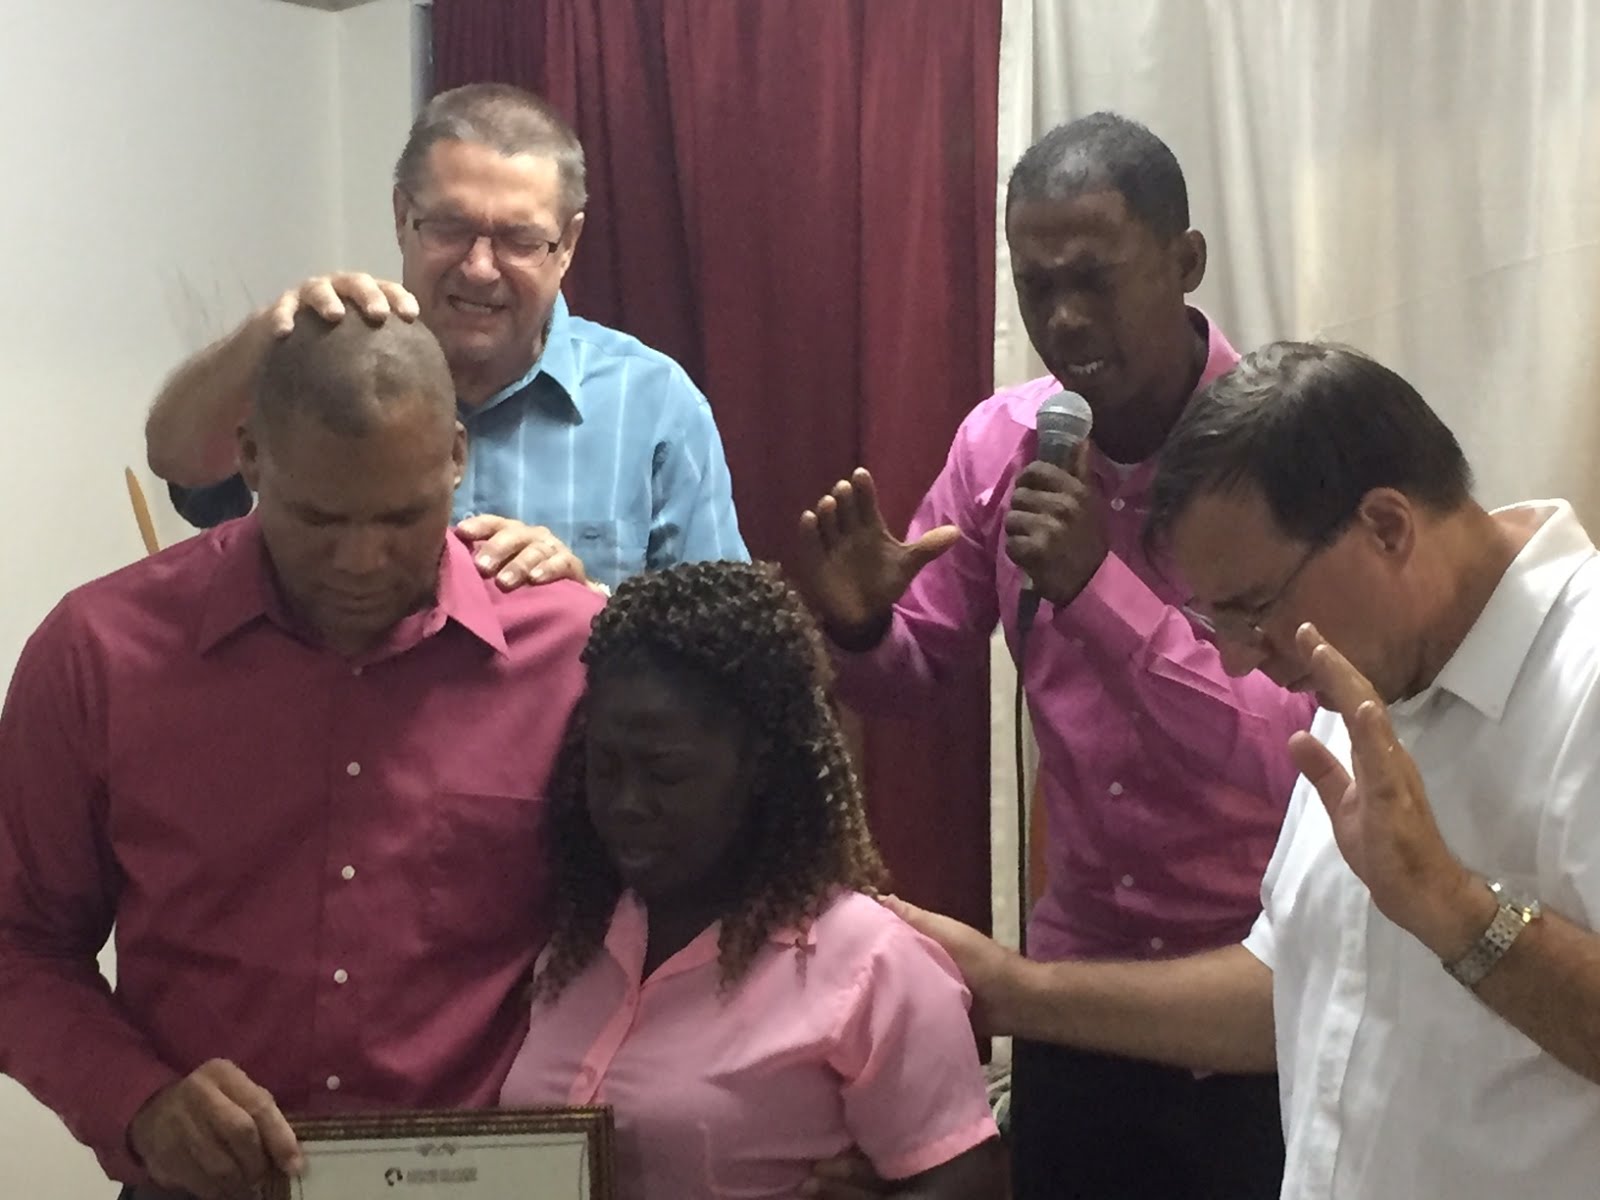 Confirming pastors in St. Kitts